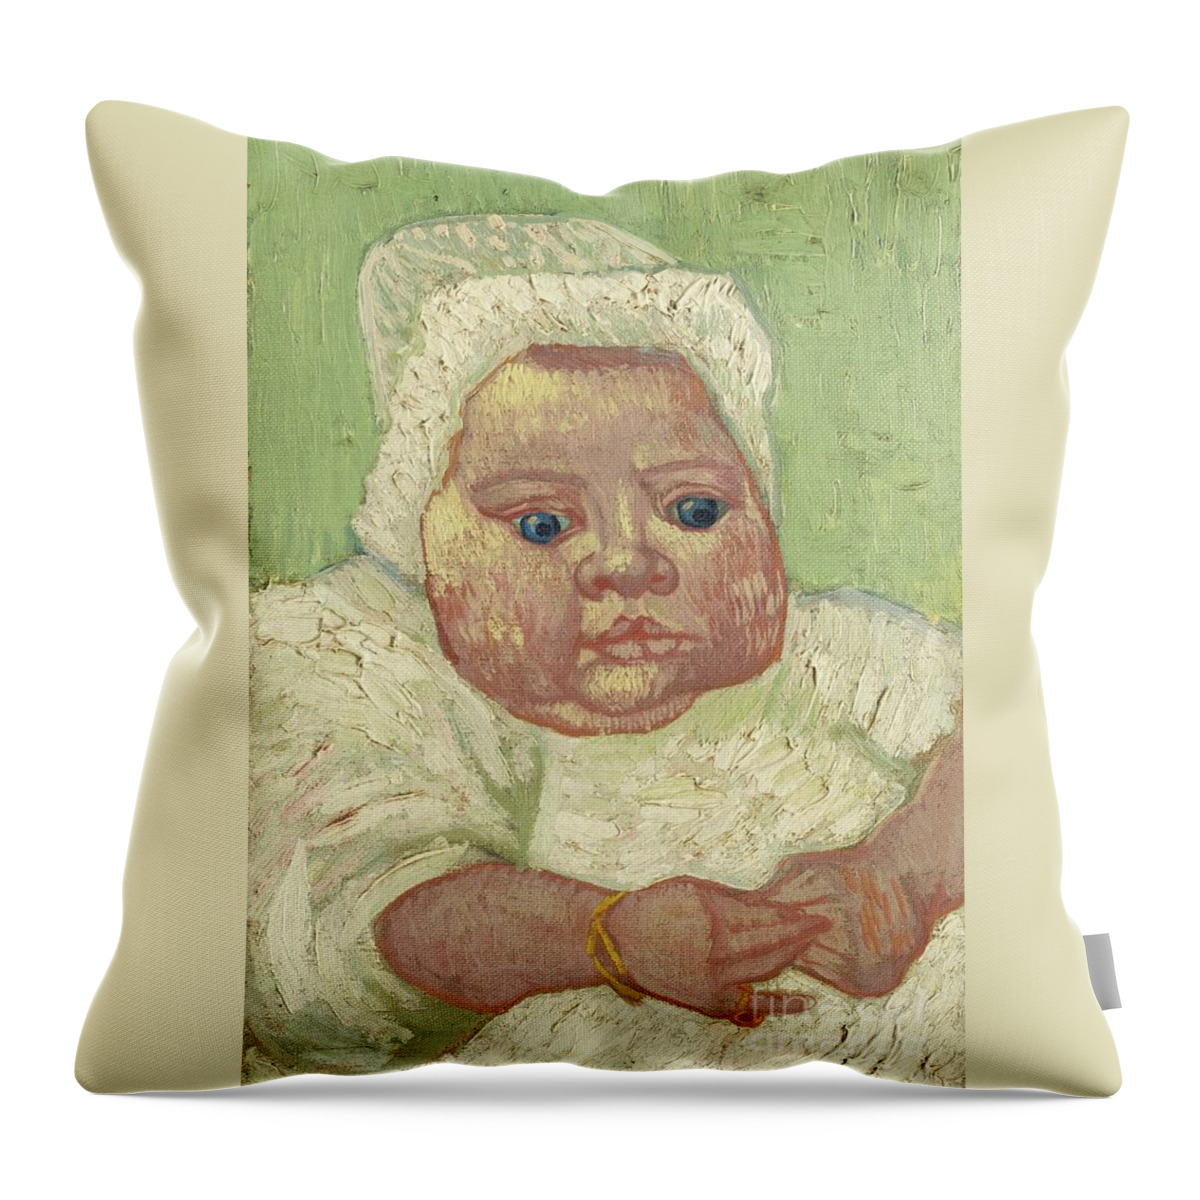 Vincent Van Gogh 1853 - 1890 Le B�b� Marcelle Roulin. Beautiful Little Baby Throw Pillow featuring the painting Marcelle Roulin by MotionAge Designs